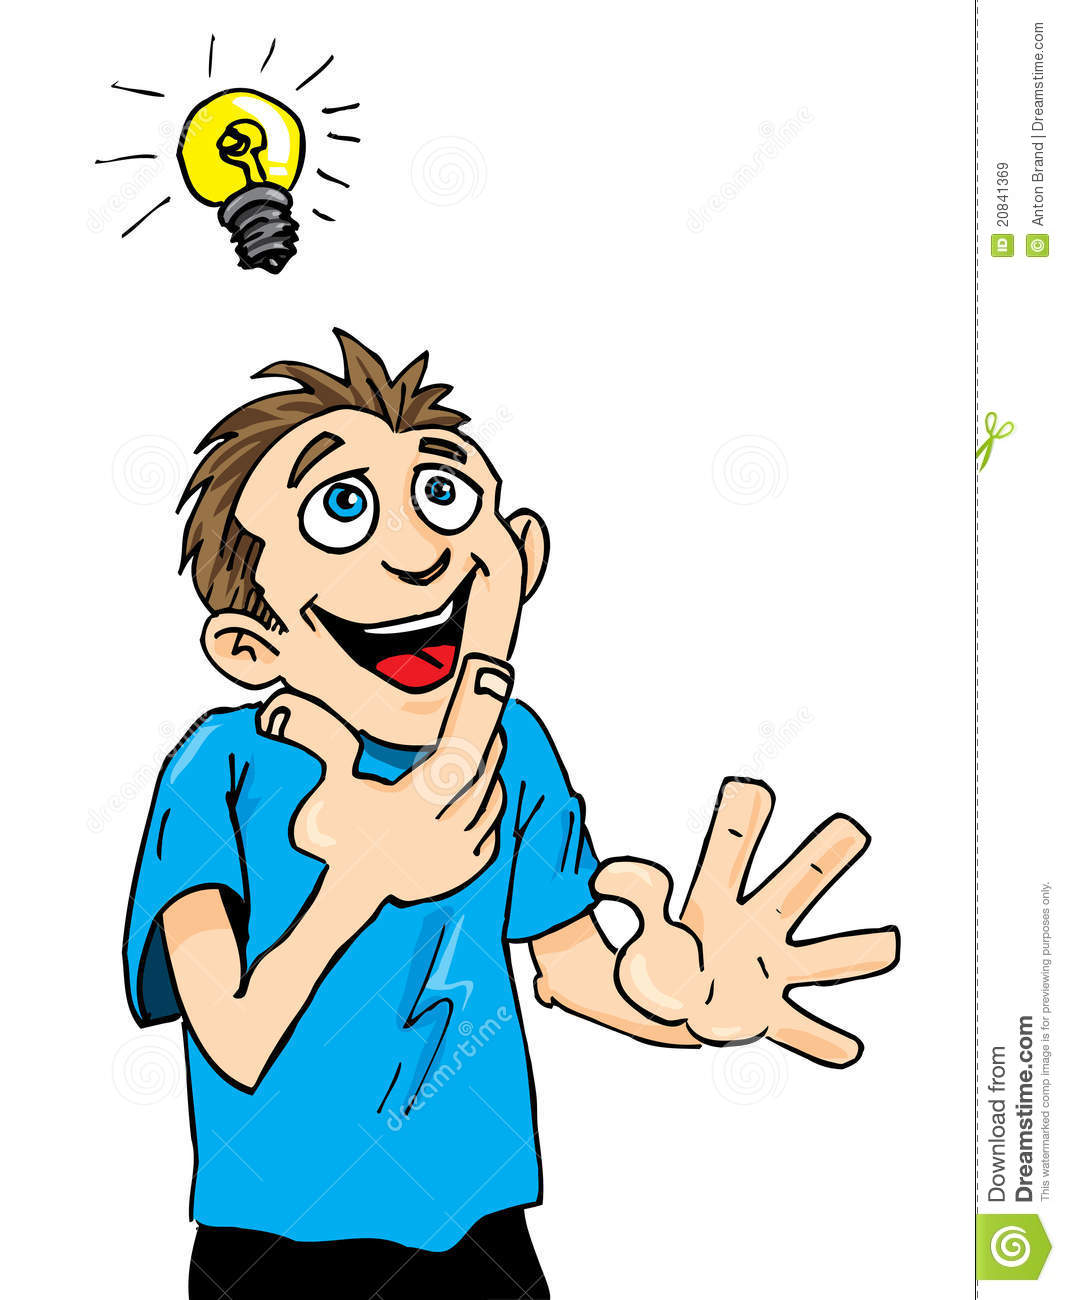 Cartoon Man Gets A Bright Idea  Royalty Free Stock Images   Image    